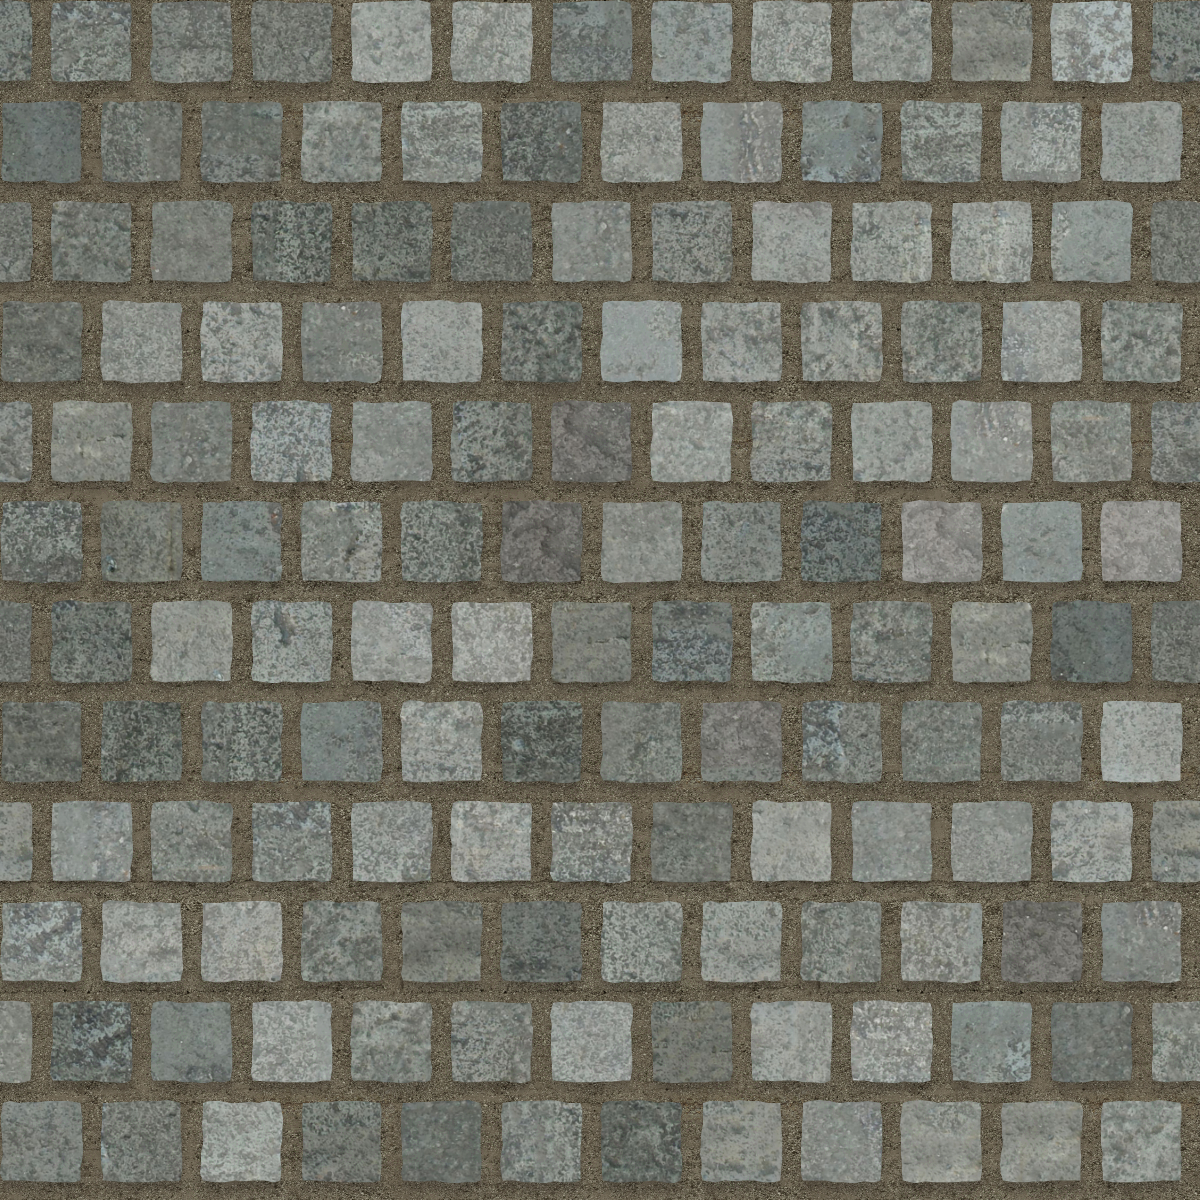 A seamless stone texture with flagstone blocks arranged in a Stretcher pattern